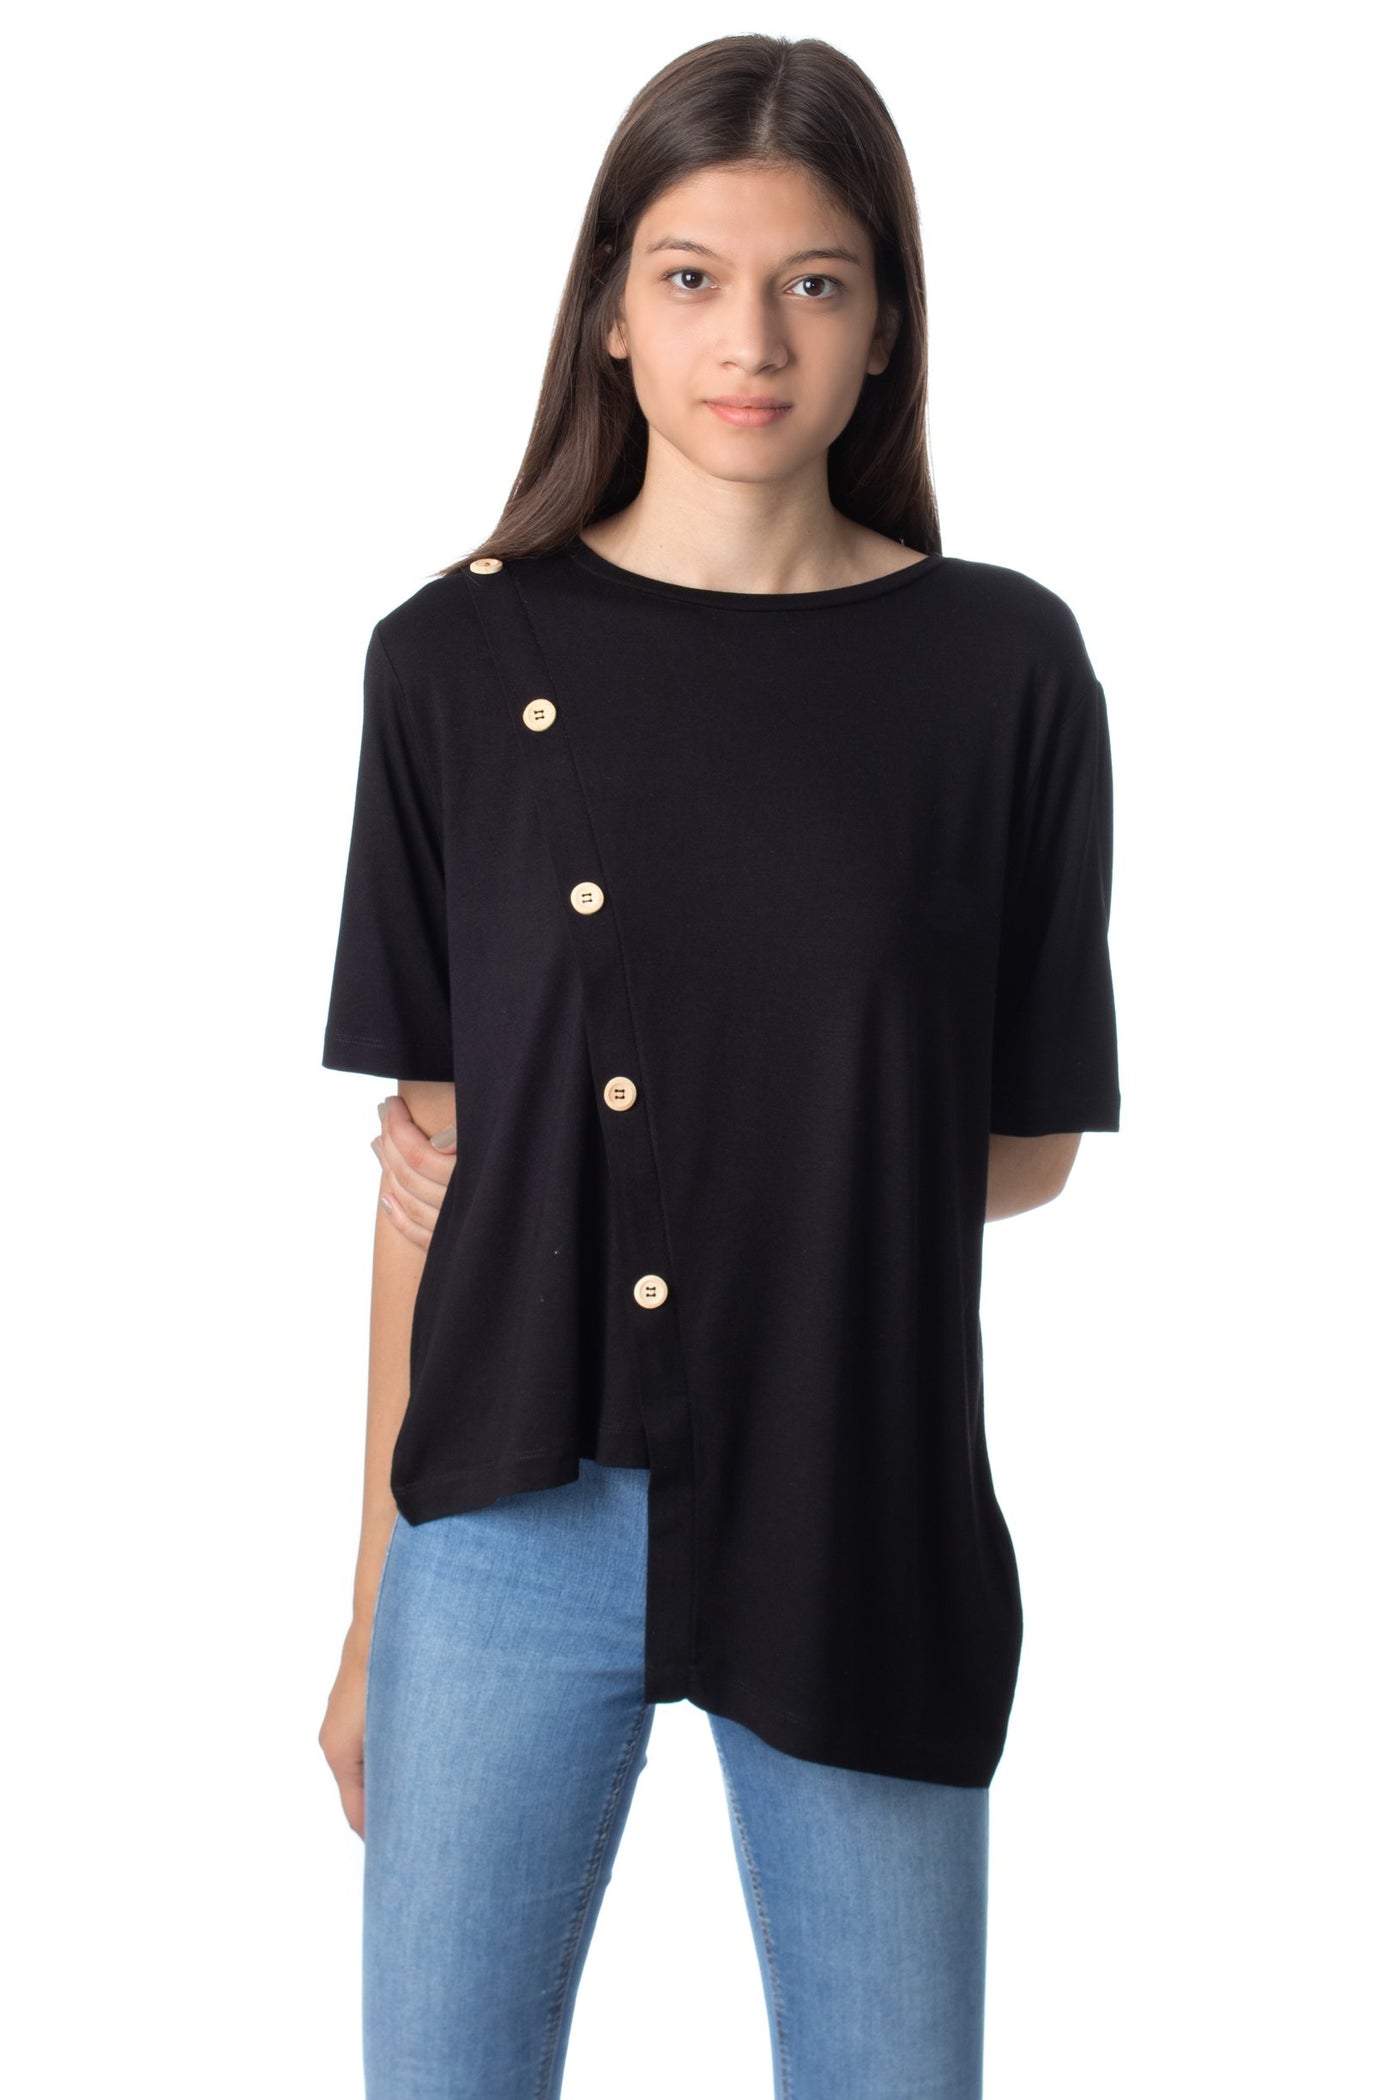 chassca crew-neck biased front blouse - Breakmood